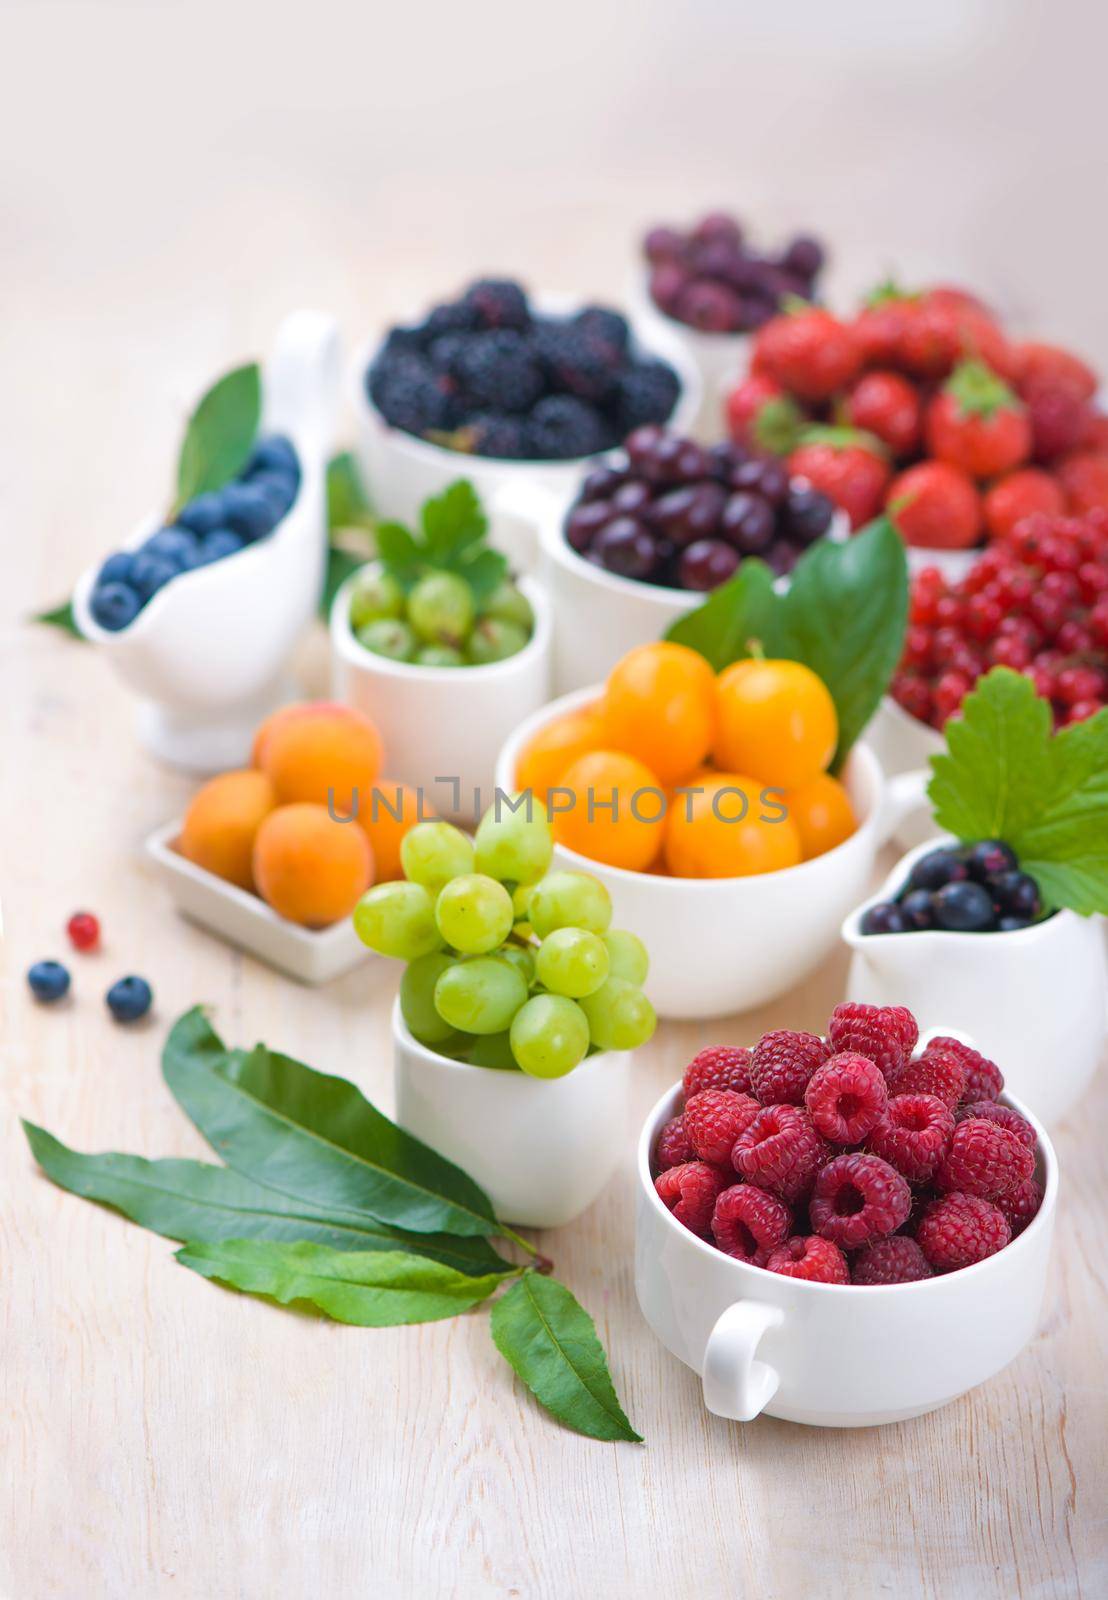 berry mix isolated on a white background.